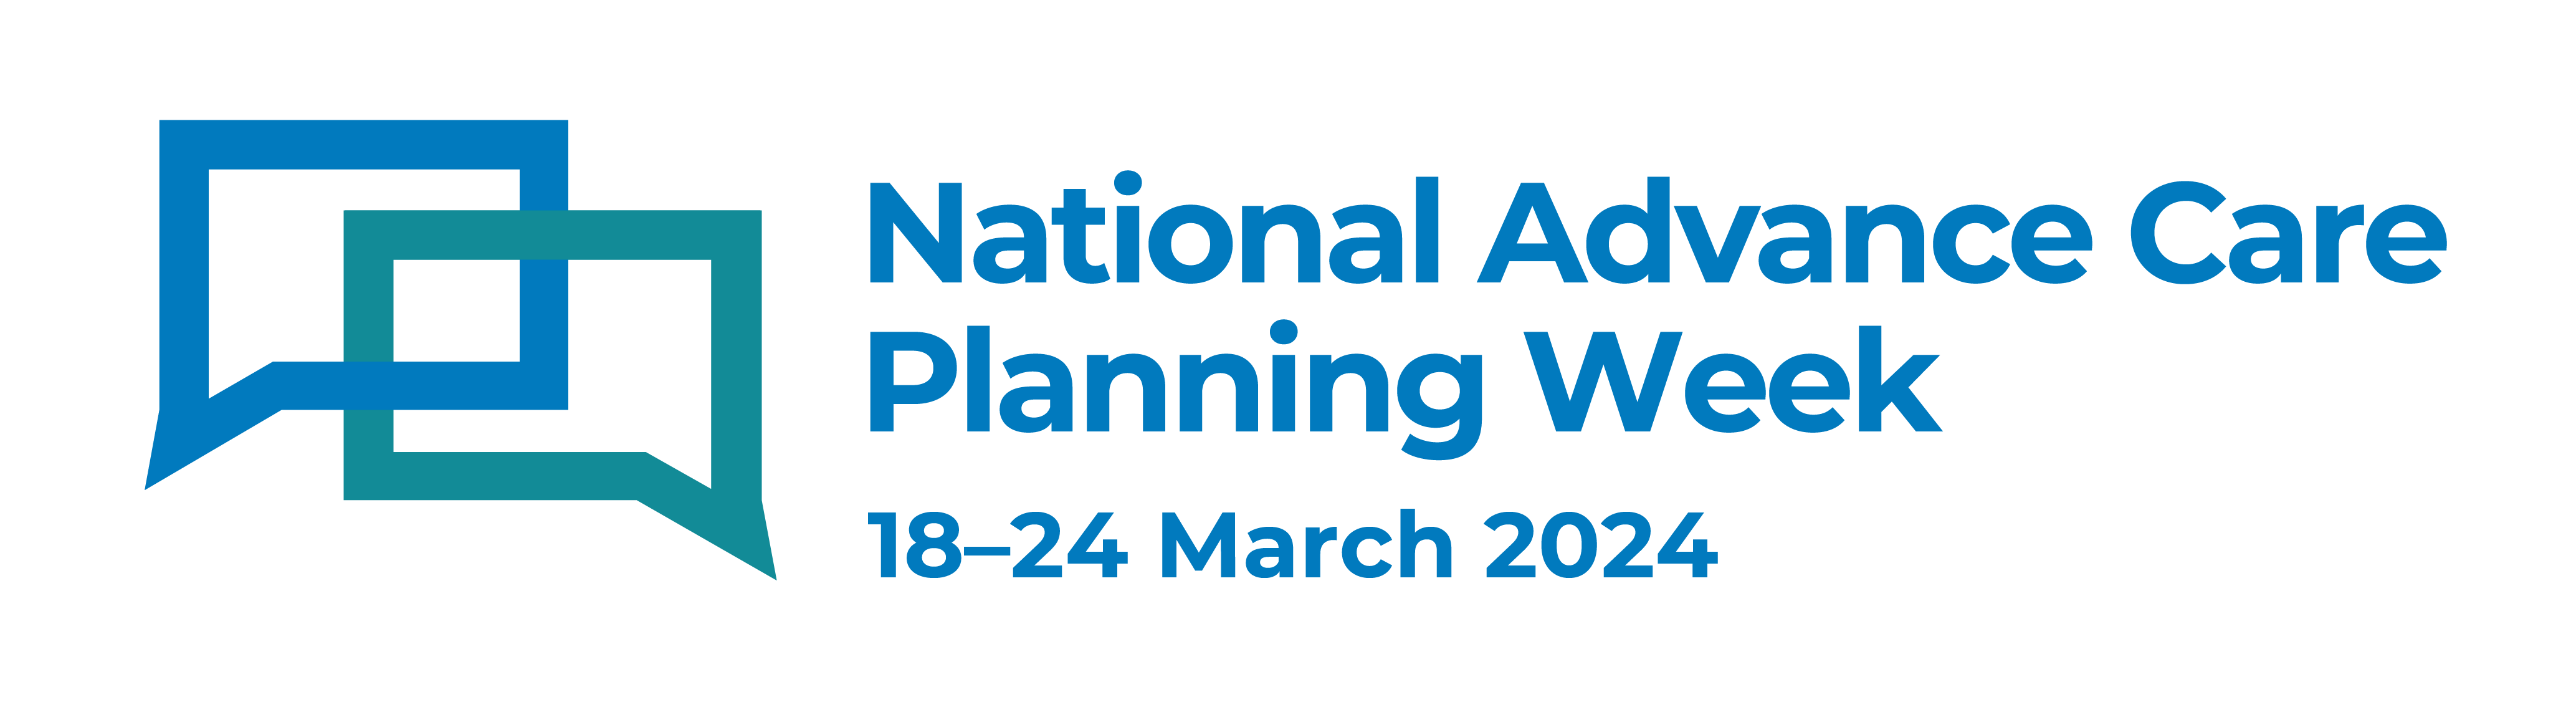 Logo for Advance care planning week 2023